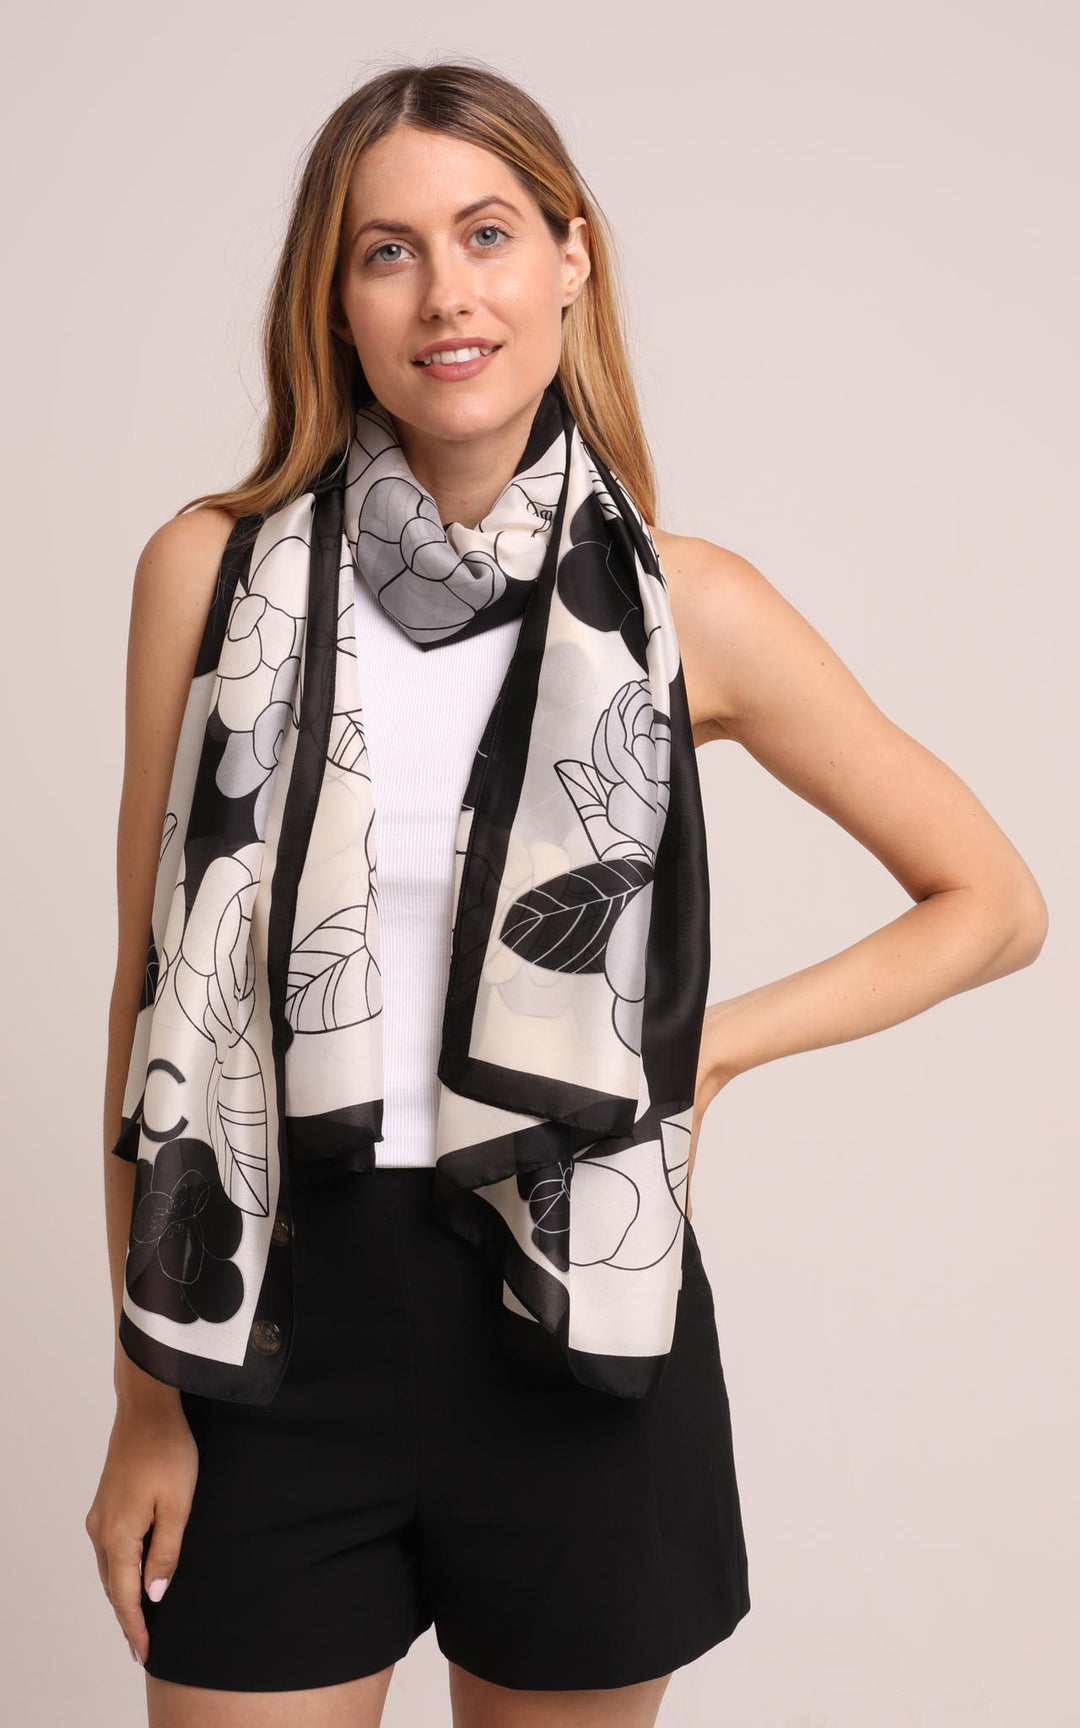 Silk Scarf in Black and White Floral Print